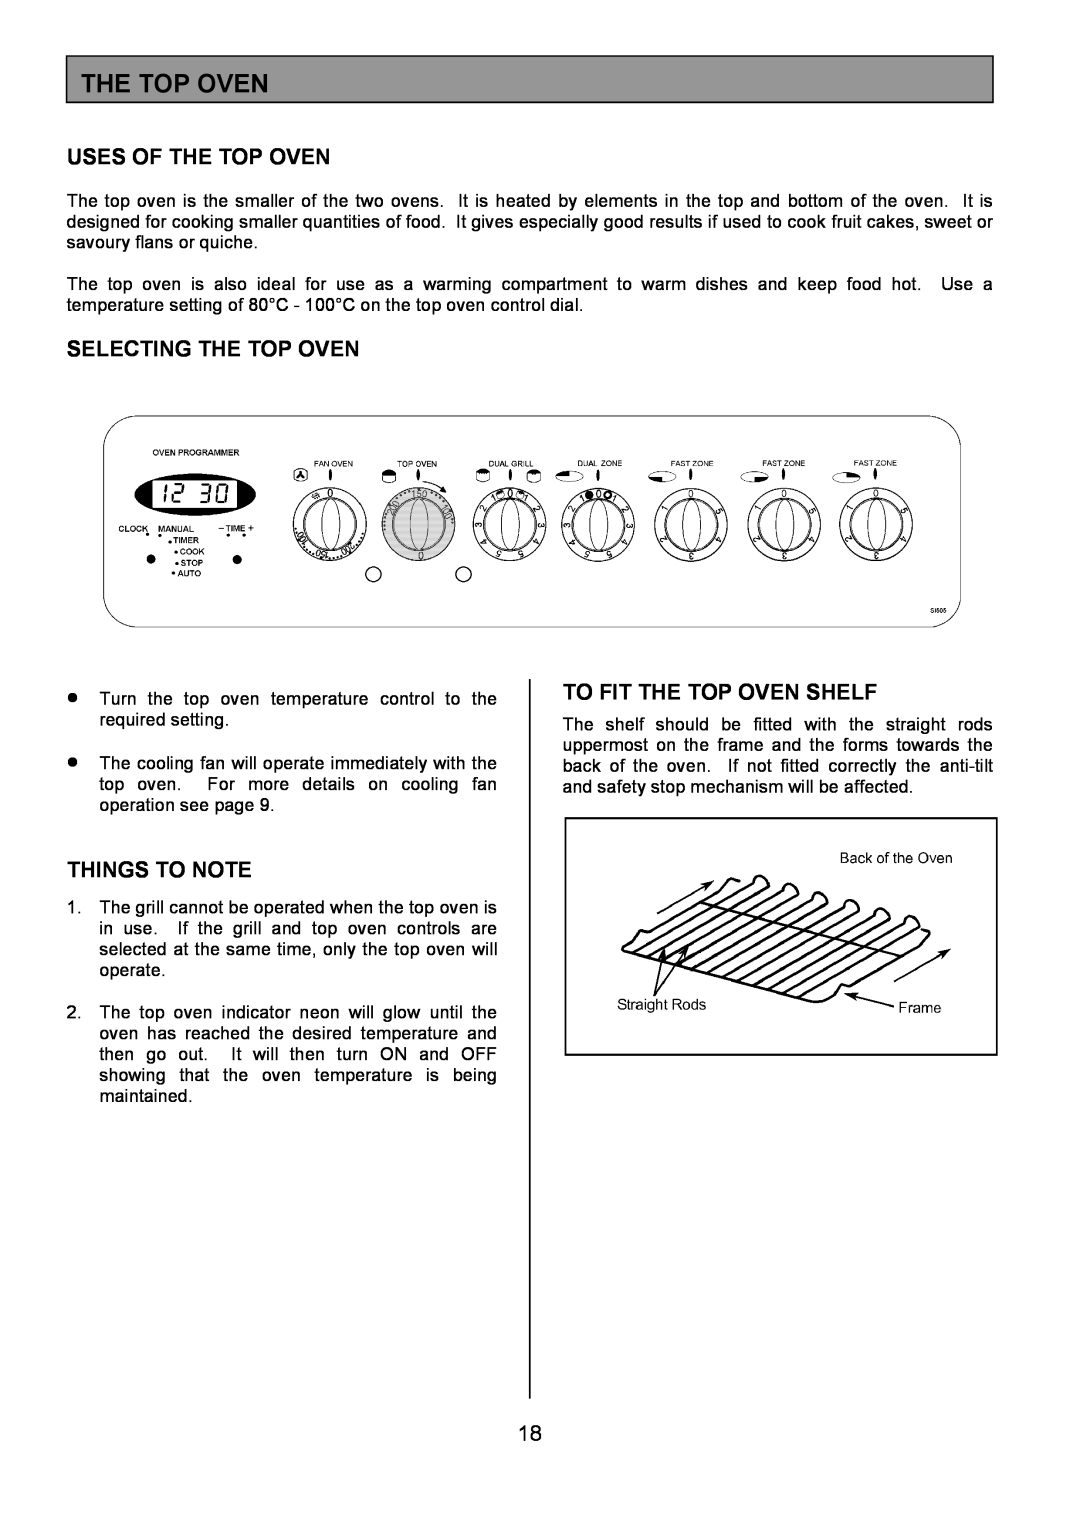 Tricity Bendix SI505 Uses Of The Top Oven, Selecting The Top Oven, To Fit The Top Oven Shelf, Things To Note 